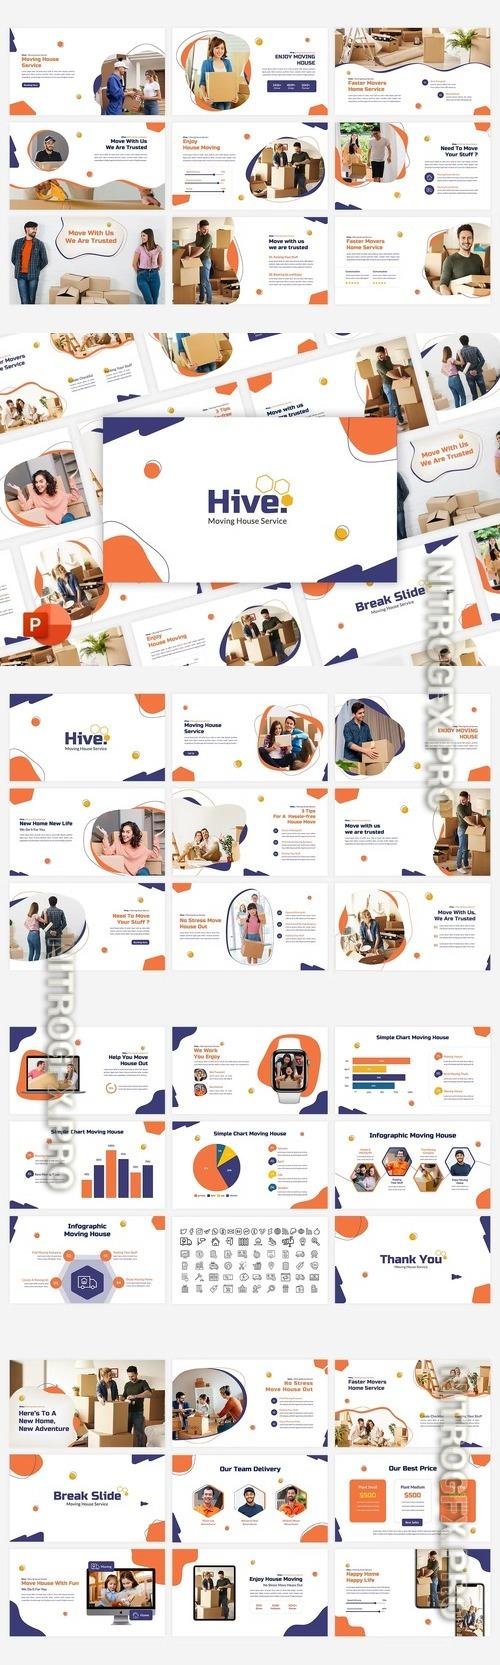 Hive - Moving House Service PowerPoint Template